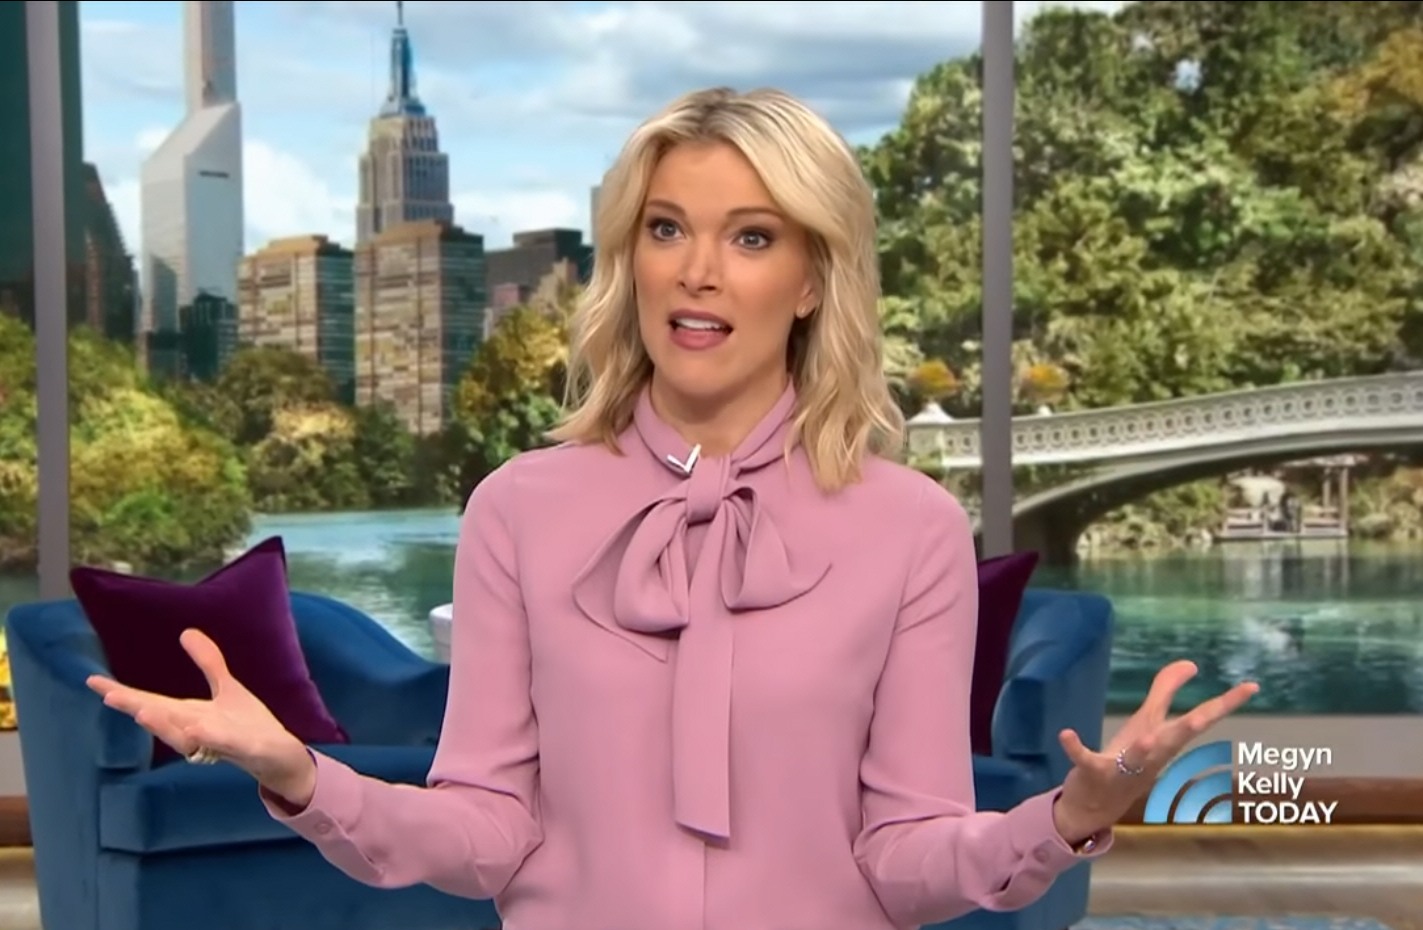 Megyn Kelly’s 'Today' hour is struggling to book celebrities, bec...